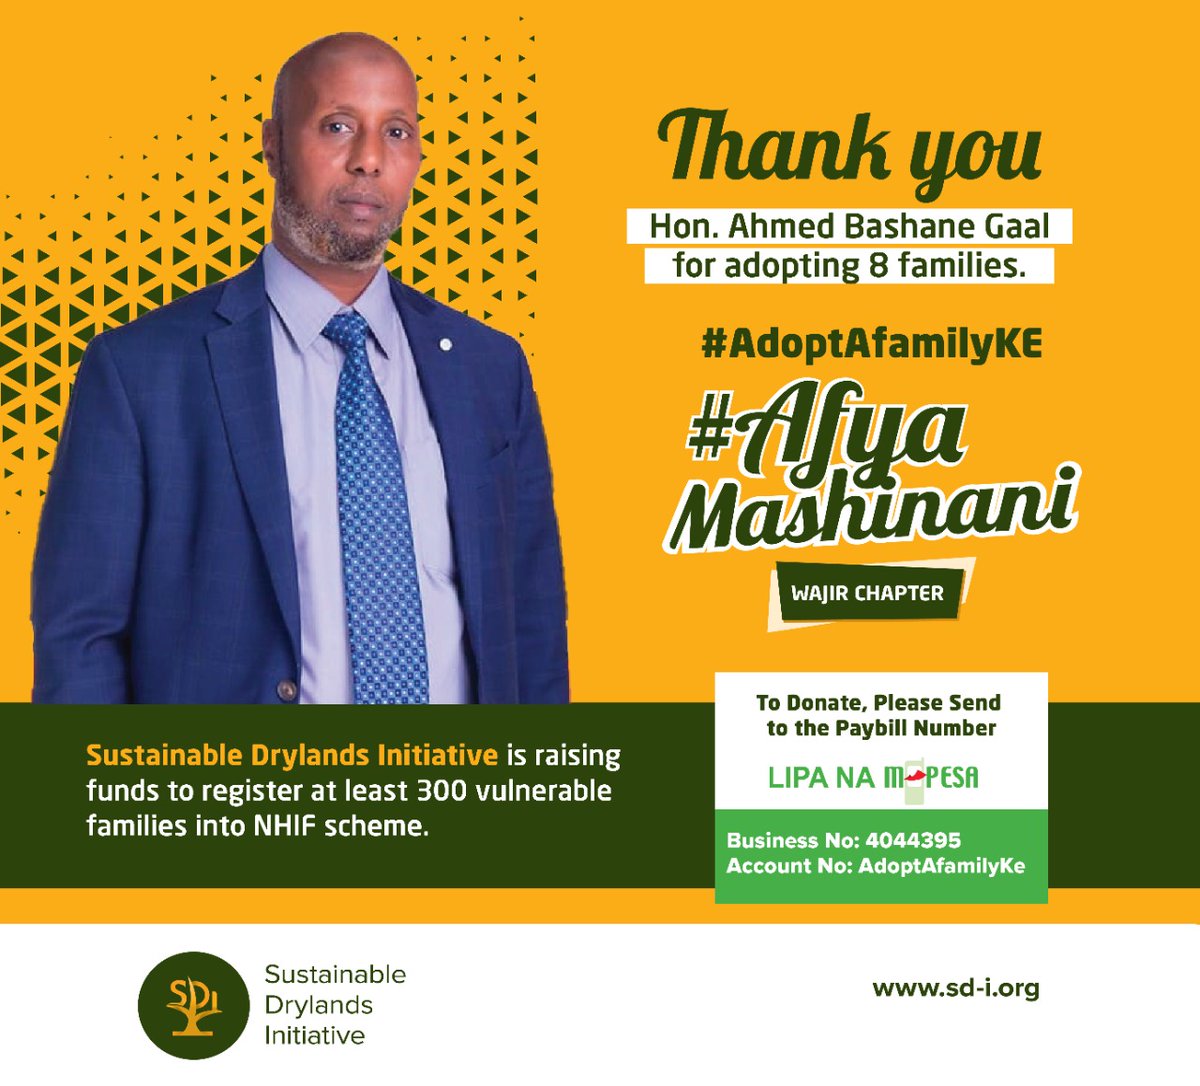 I @HonBashane Member of Parliament for Tarbaj Constituency, I support #Adoptafamilyke #AfyaMashinani #WajirChapter an intitiave by @sdi_org. 

Please support the initiative and #AdoptAFamily. Thank you.